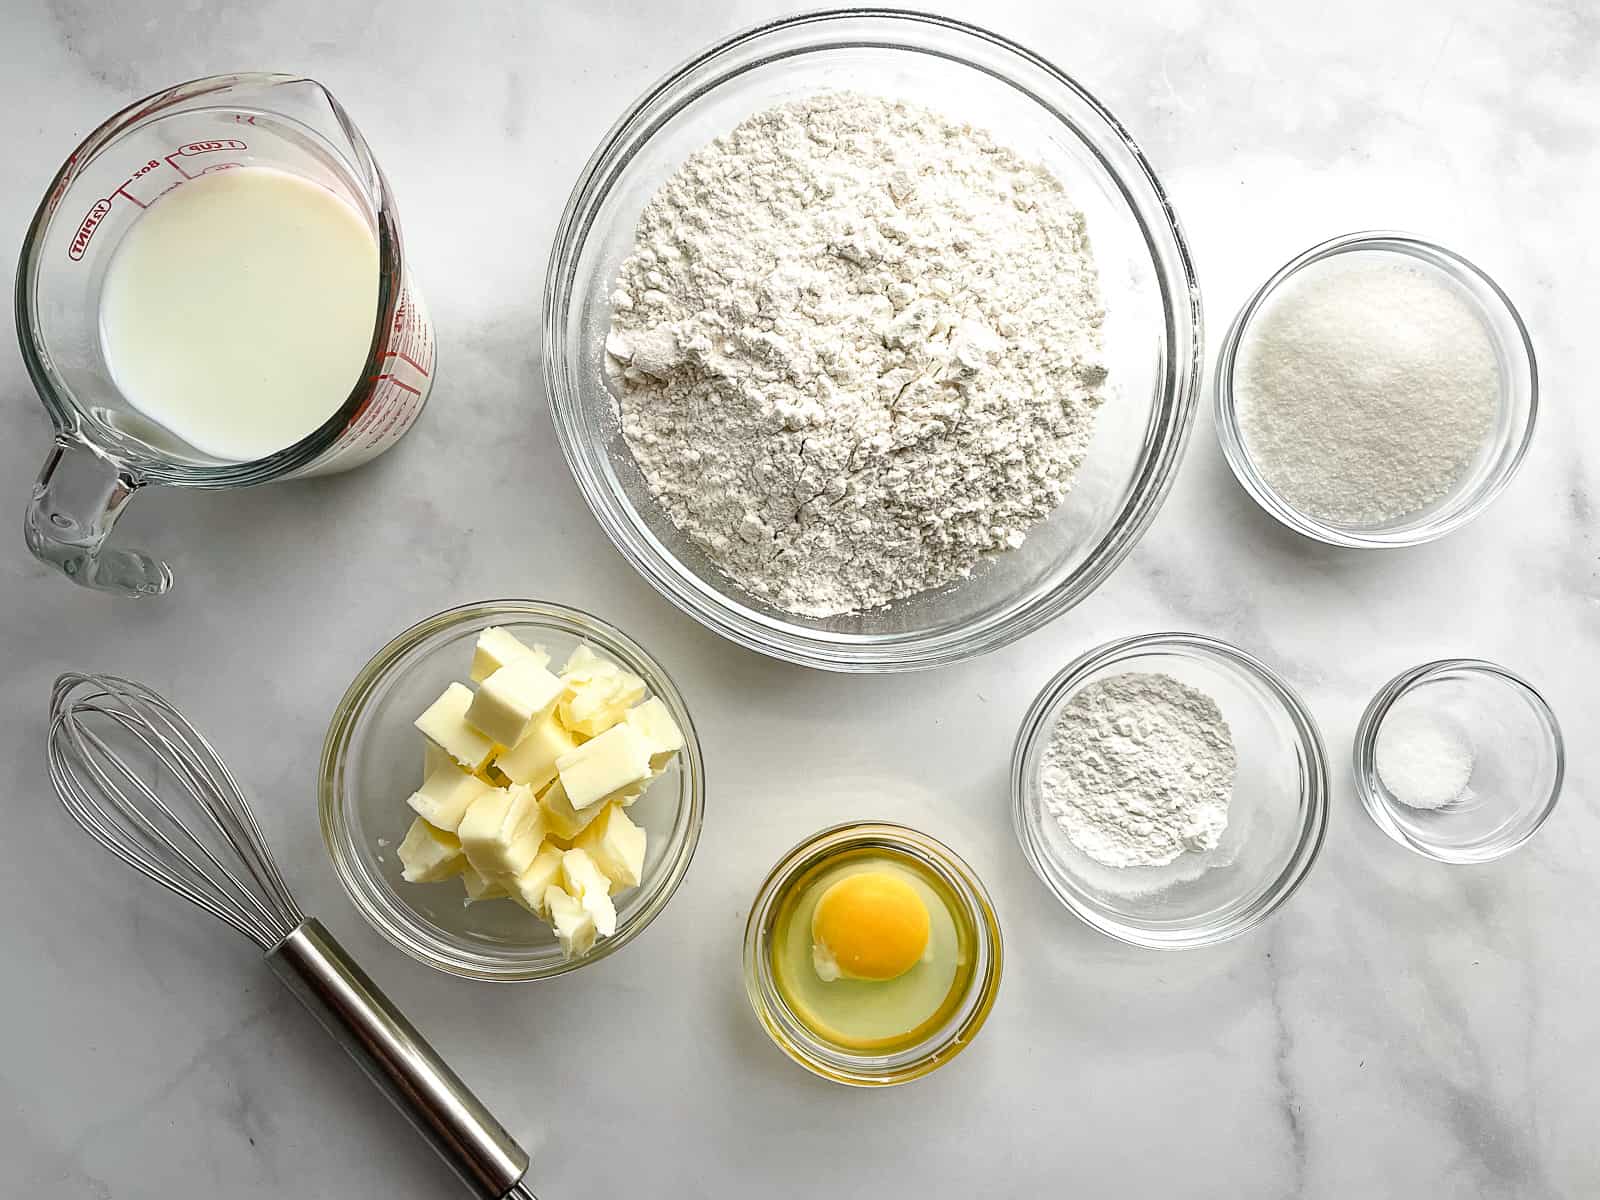 Ingredients for gluten-free scones in individual bowls.